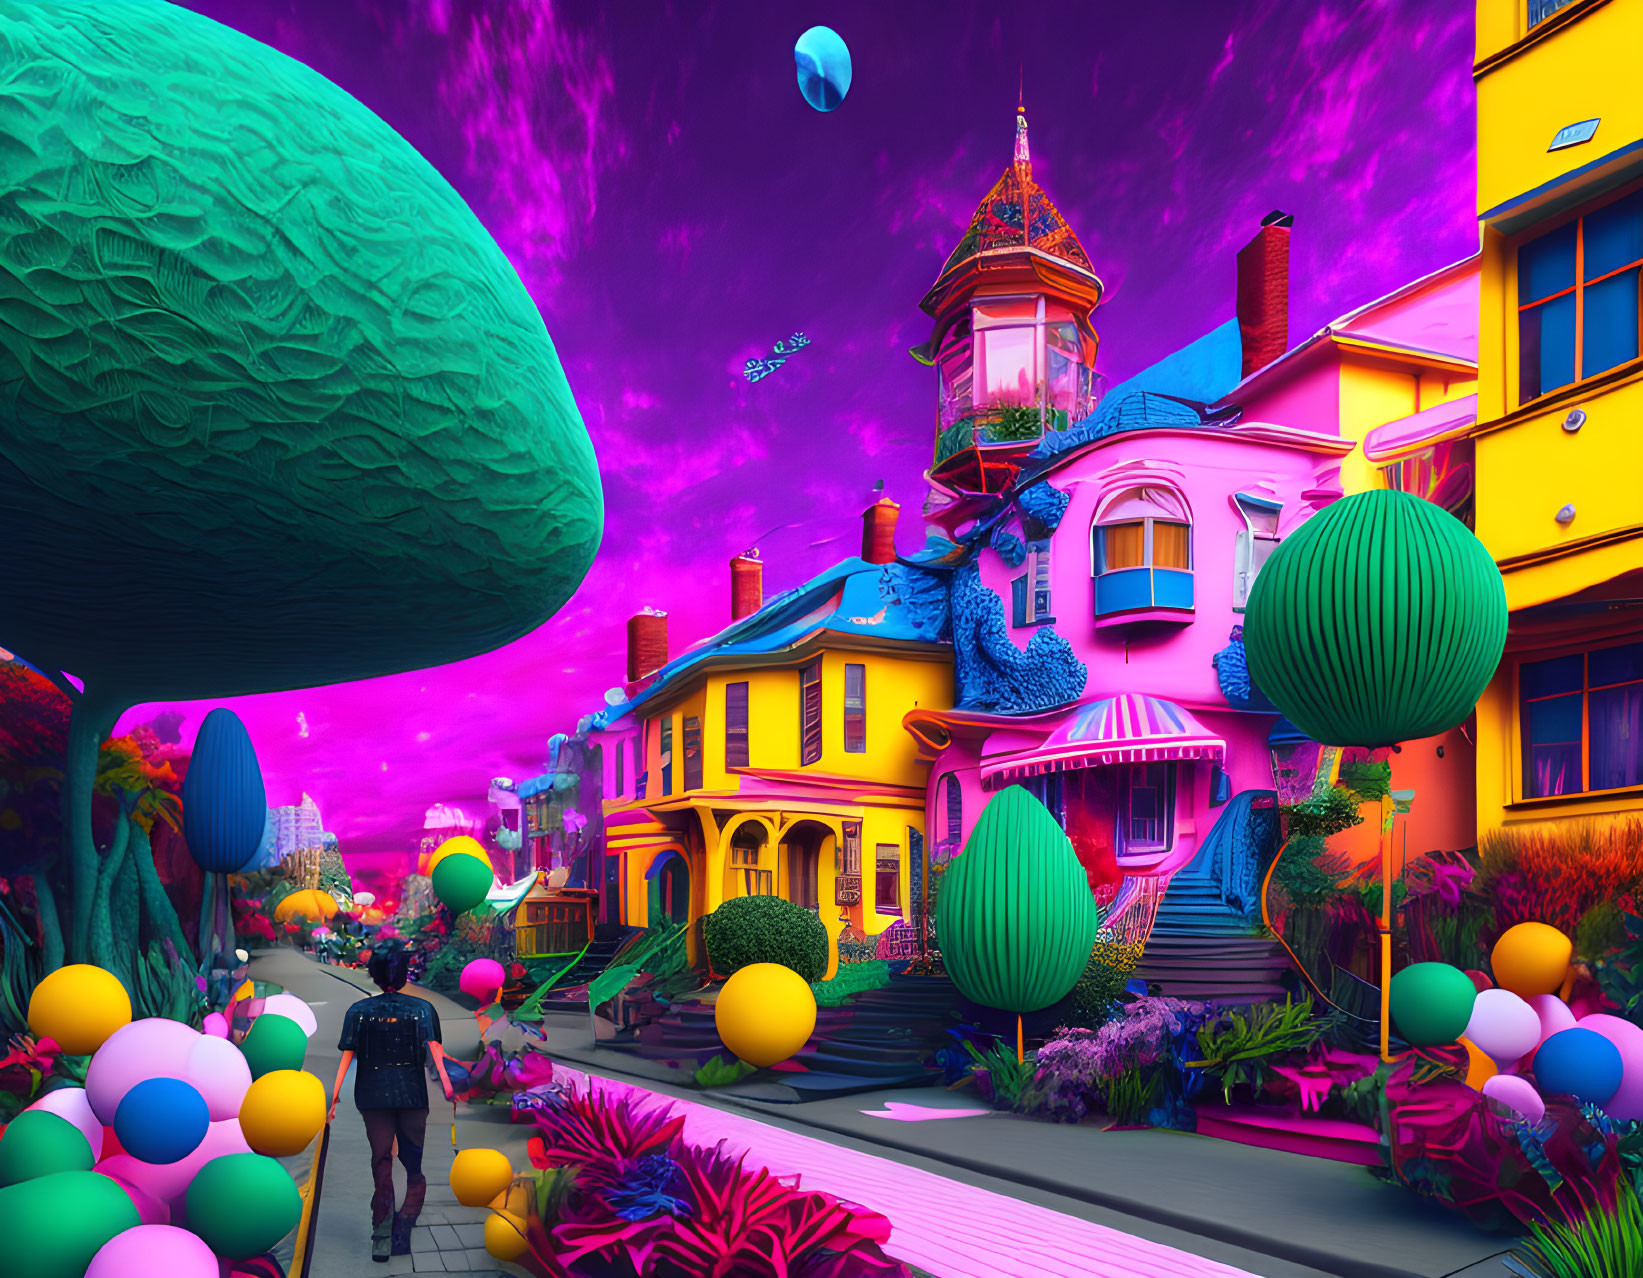 Colorful surreal landscape with yellow Victorian house, oversized trees, and planets.